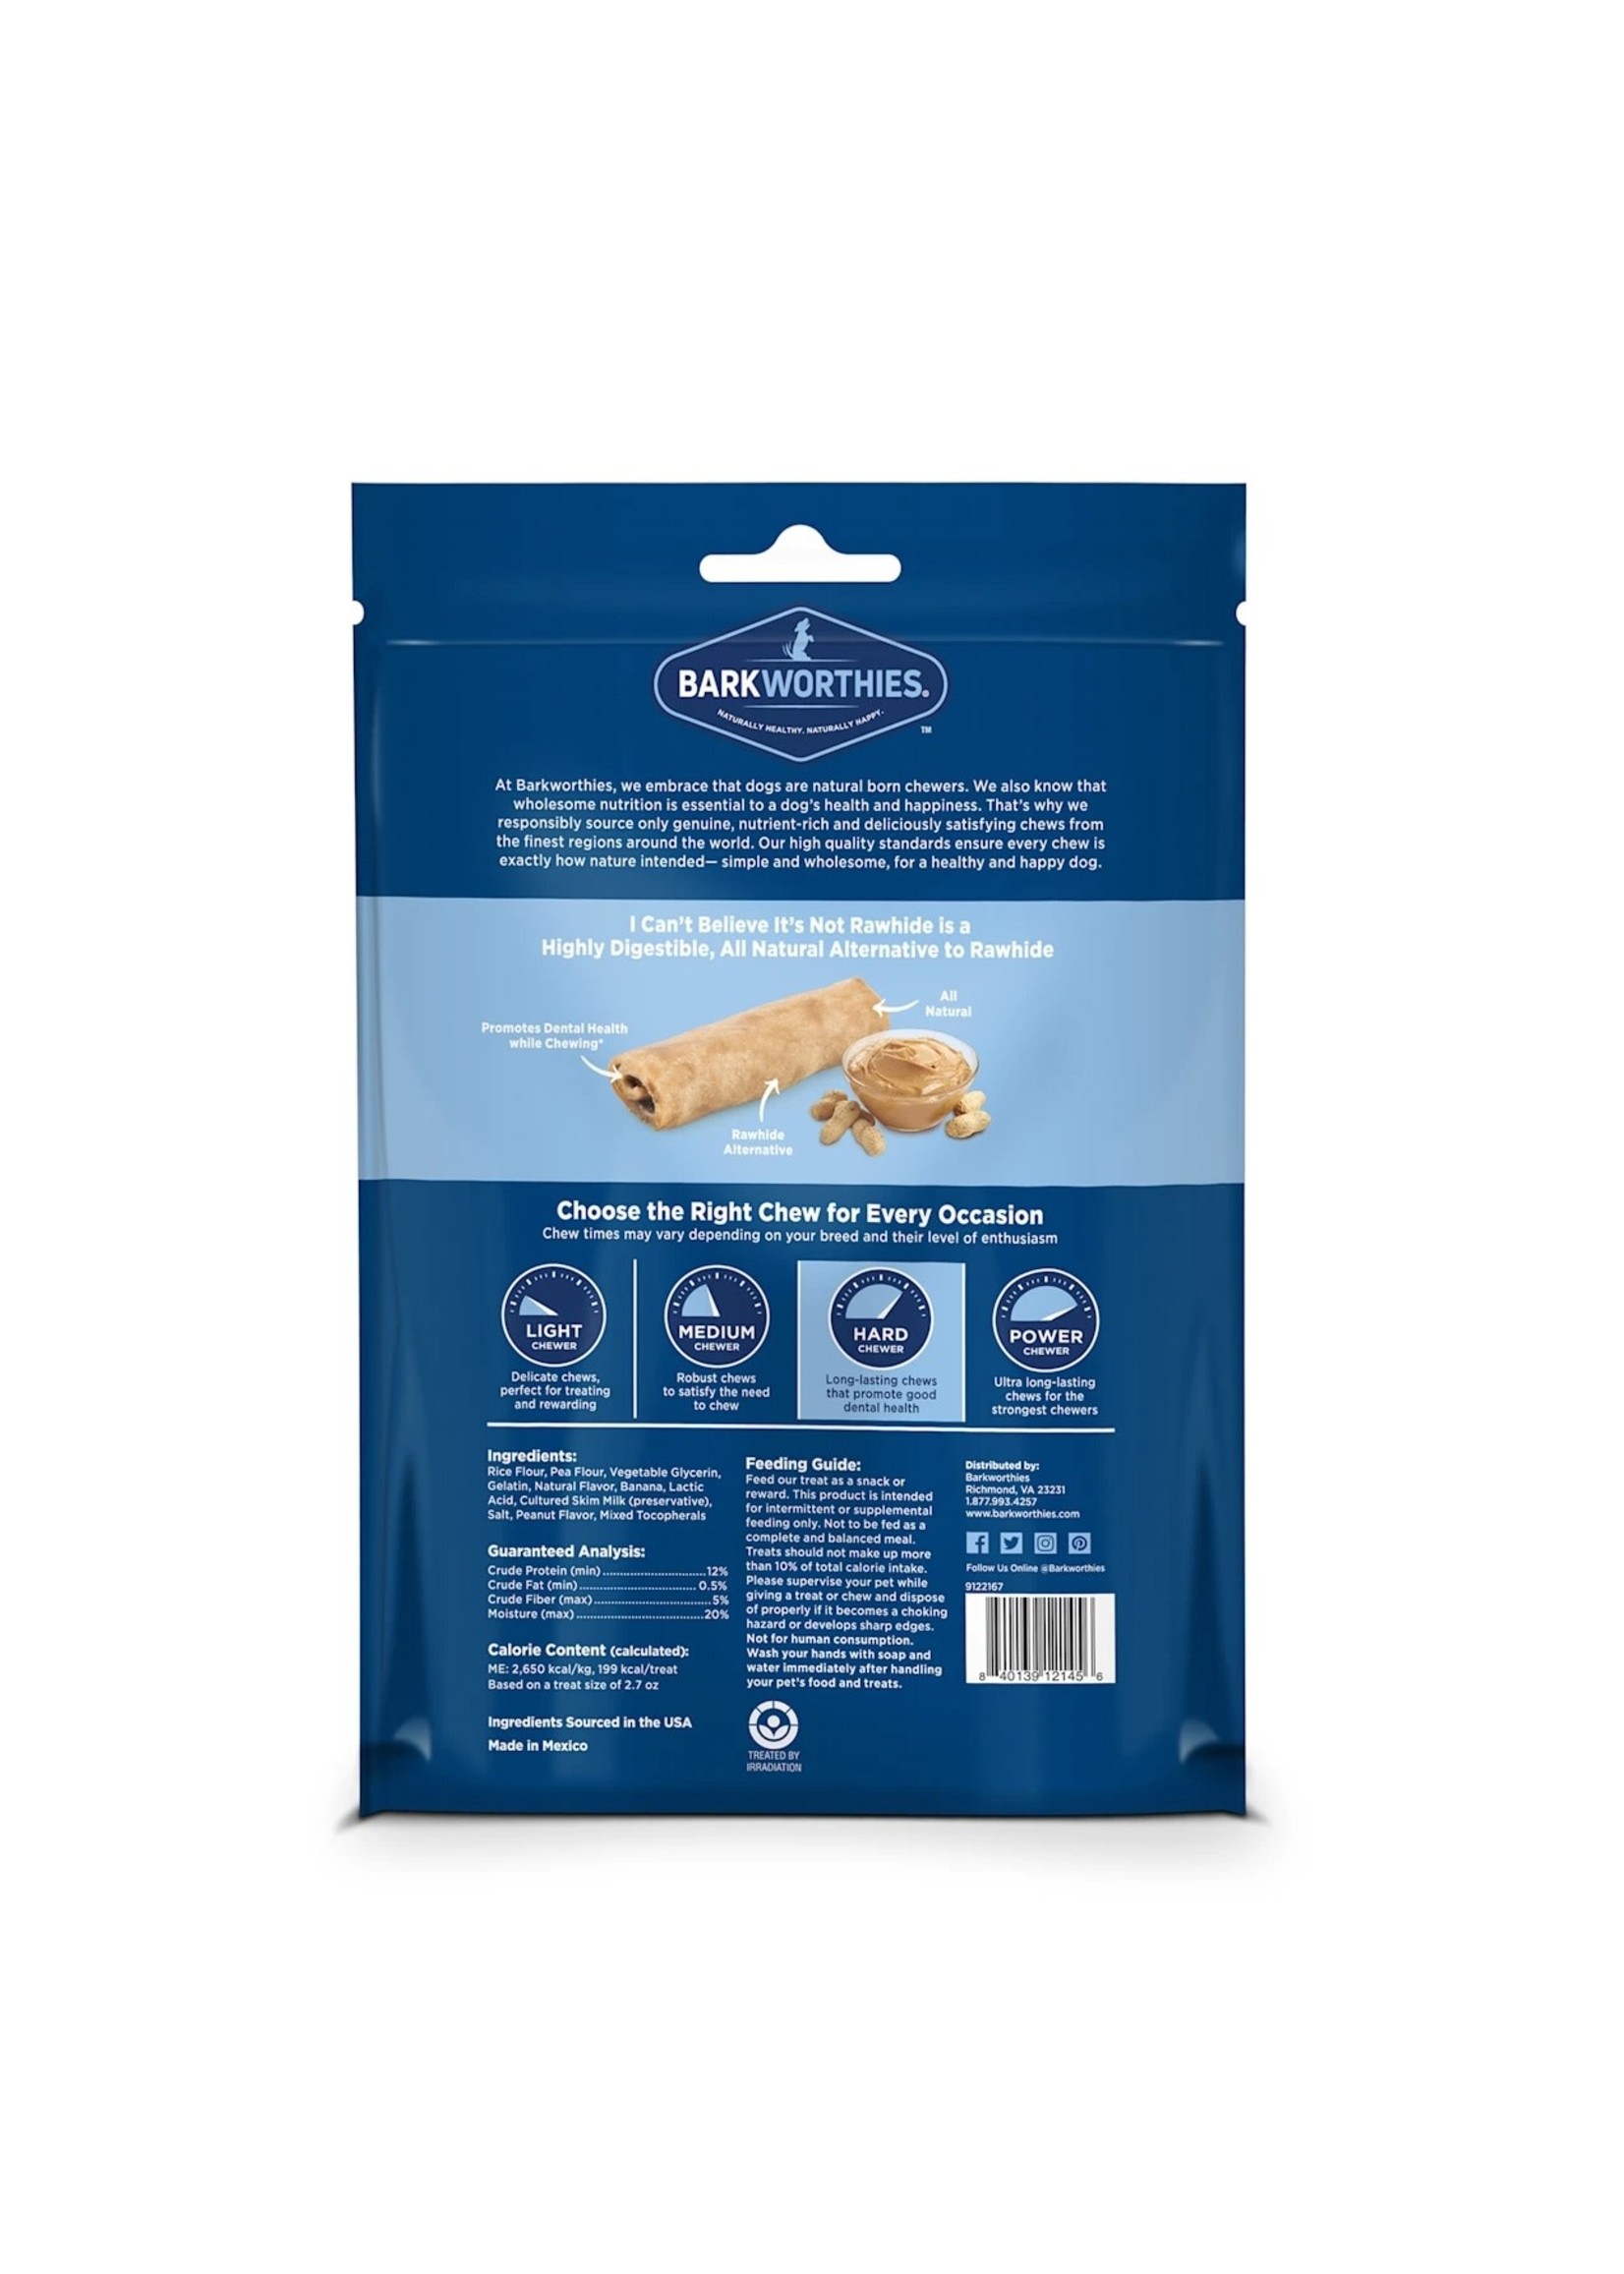 Barkworthies I Can't Believe It's Not Rawhide Dog Roll Chews (Large 6-7") 2 Pack